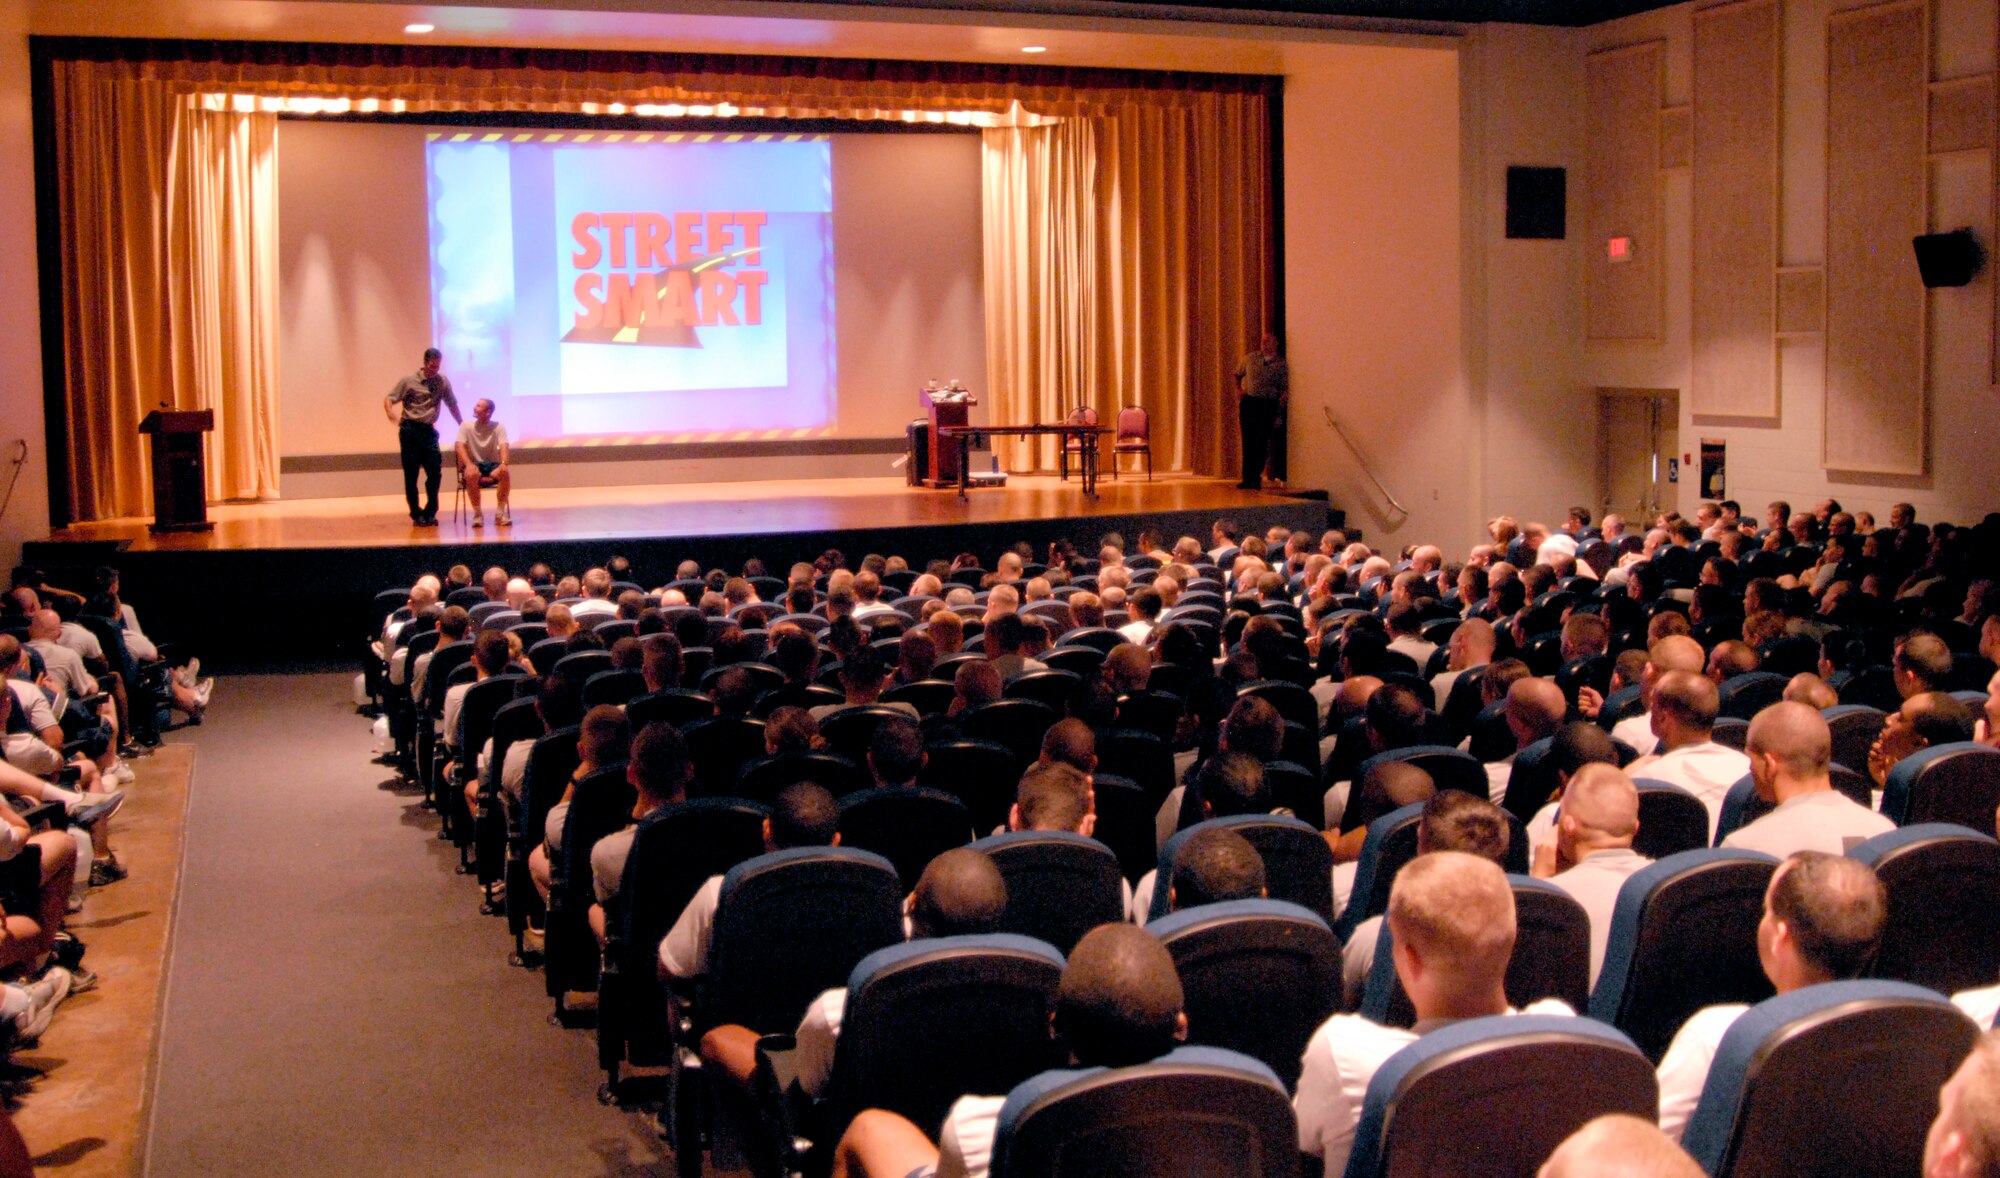 GOODFELLOW AIR FORCE BASE, Texas -Servicemembers fill the base theater to listen to the Street Smart presentation during Safety Day activities, May 27. Street Smart is a presentation designed to take viewers into the experience of saving the life of someone who has suffered severe trauma from a car crash. (U.S. Air Force photo/Tech. Sgt. Jon DuMond)

